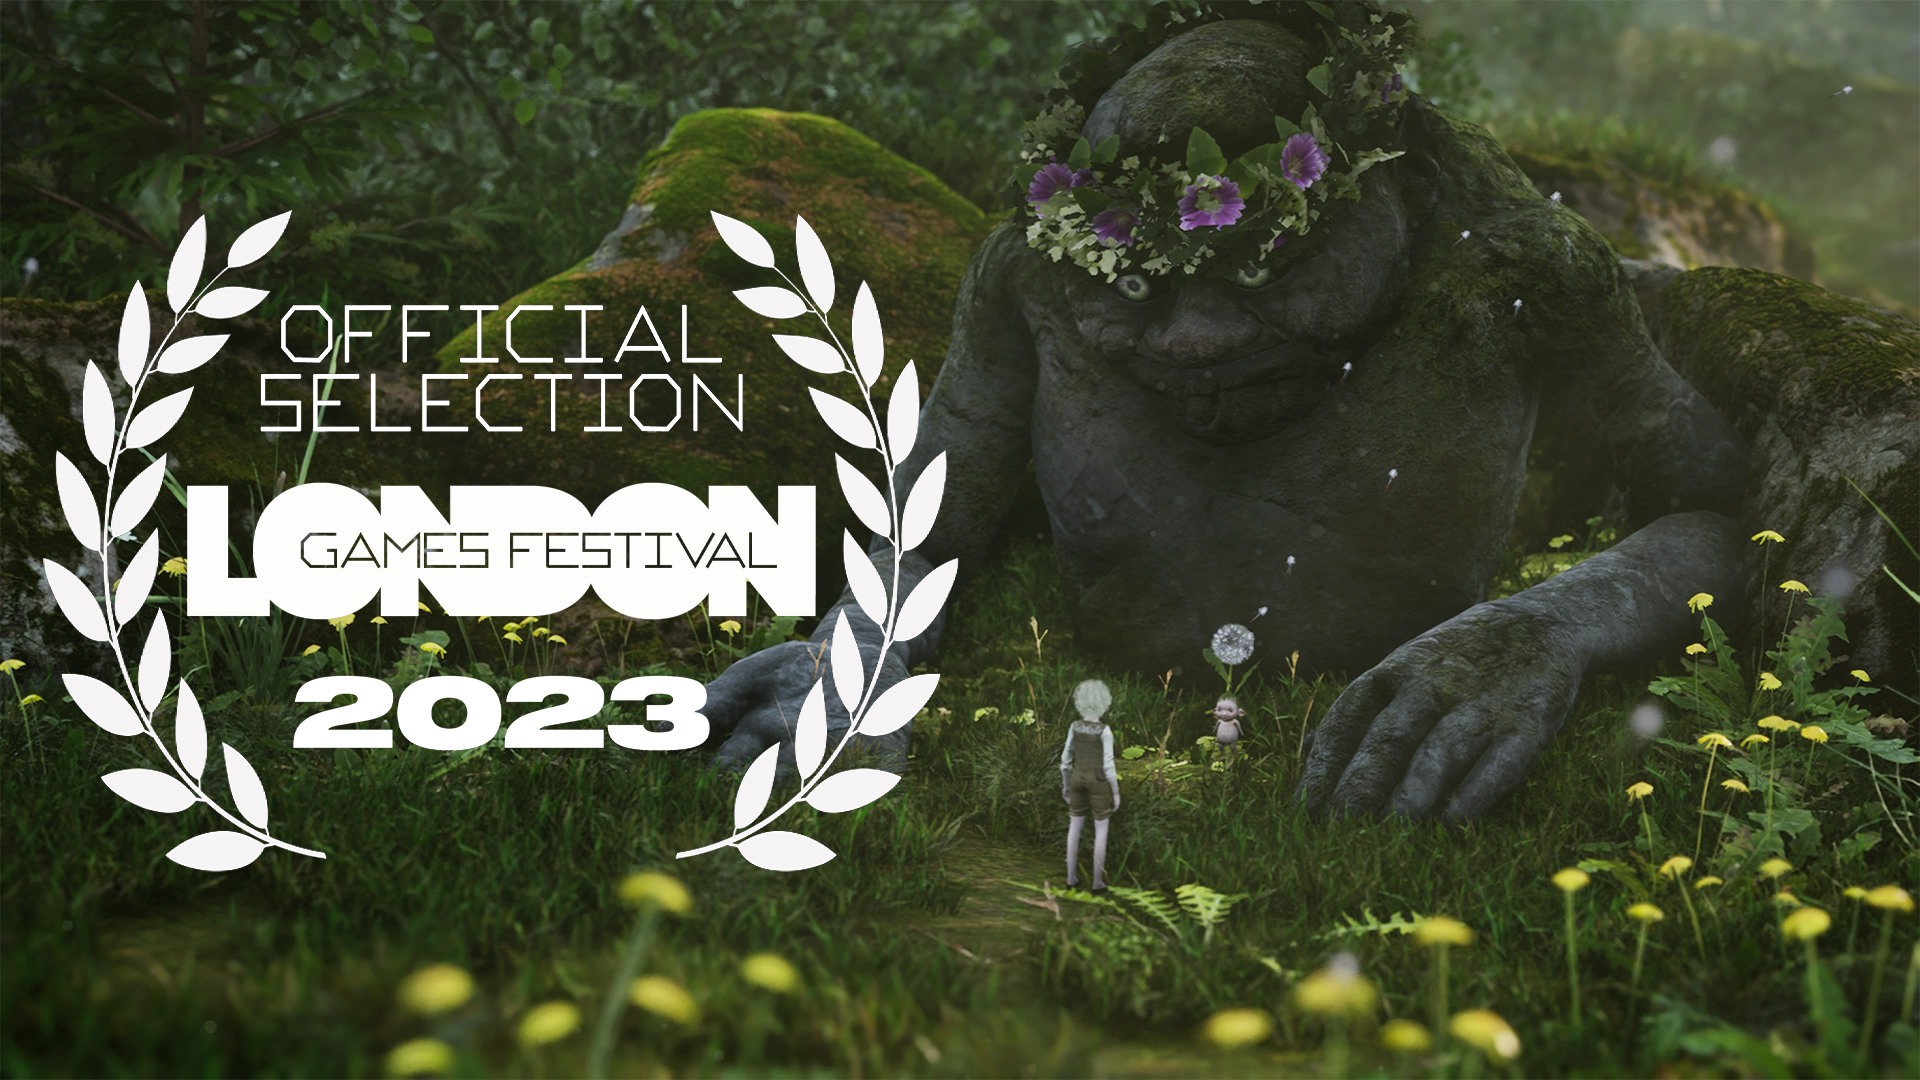 Bramble is a London Games Festival Official Selection